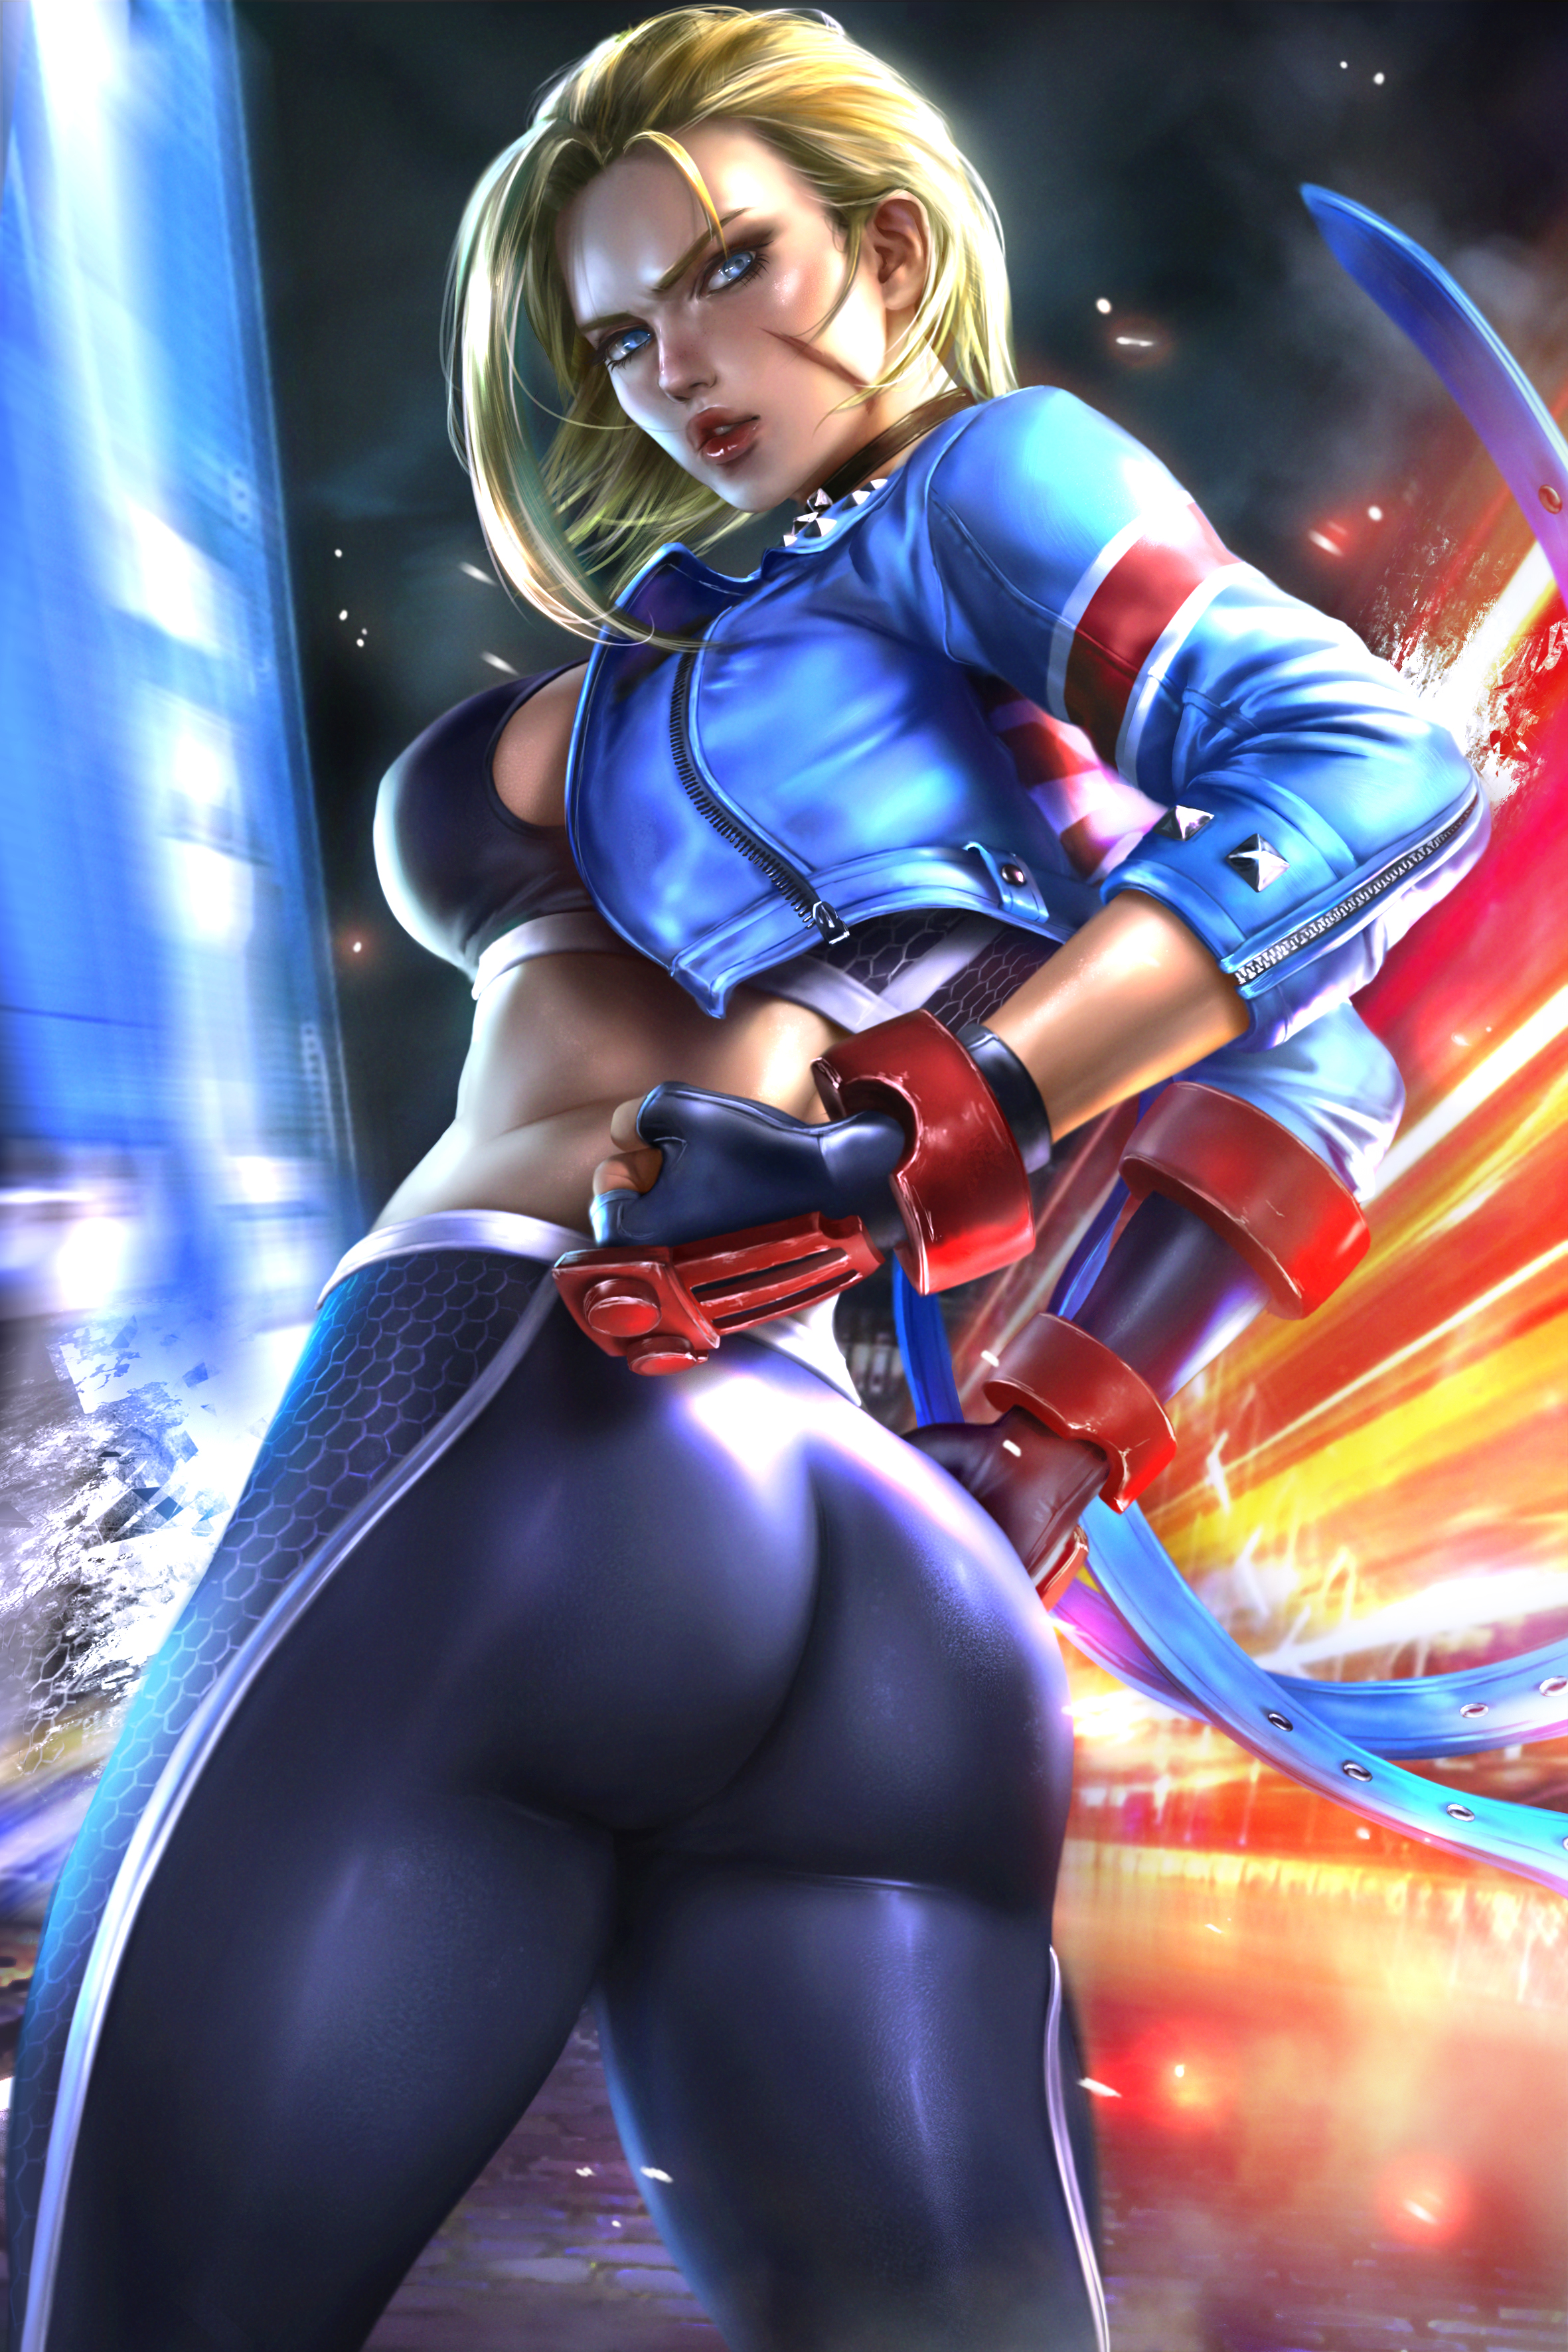 Cammy White Here is my little tribute fanart of the badass girl